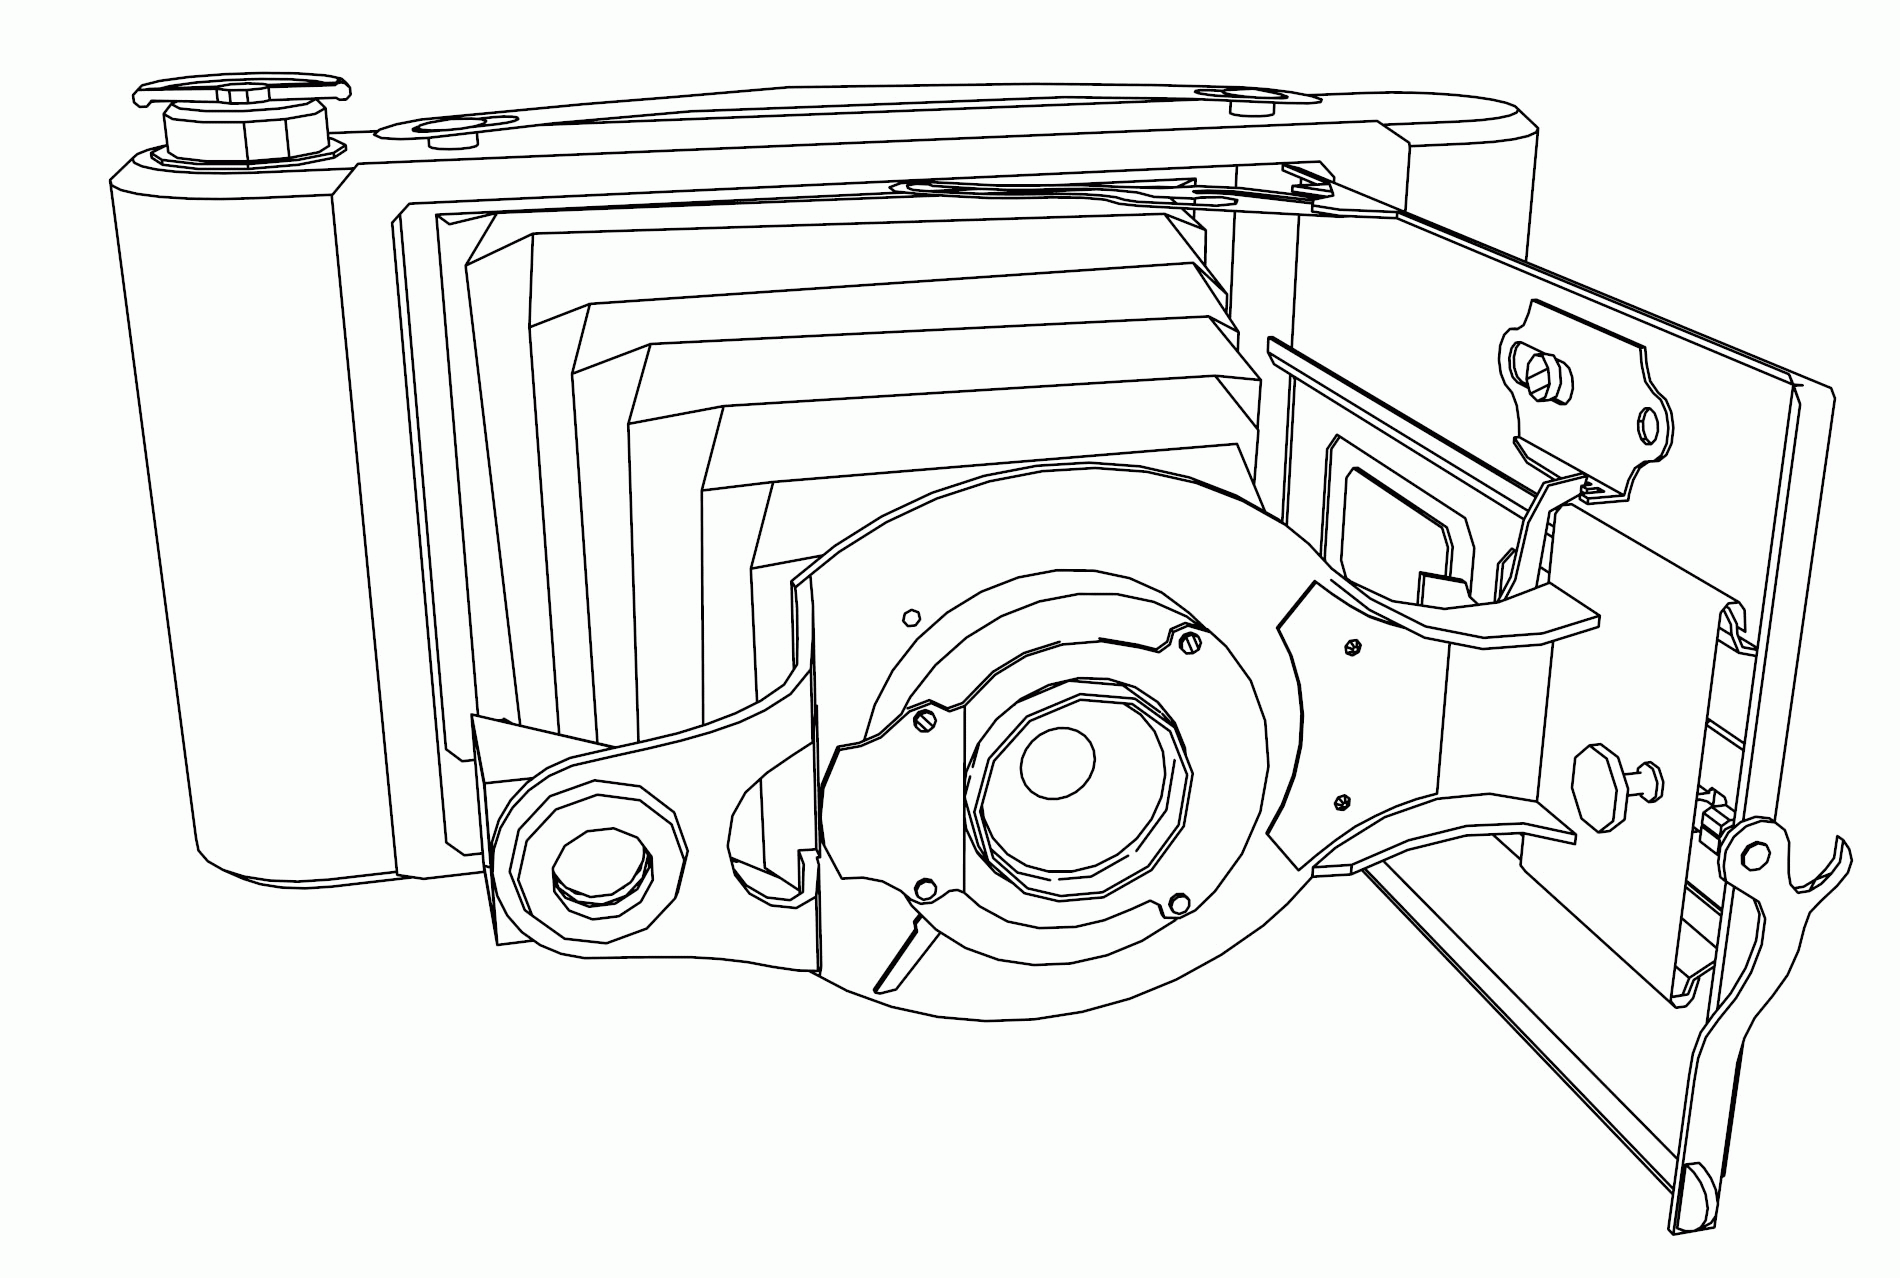 Download Camera Coloring Page - Coloring Home